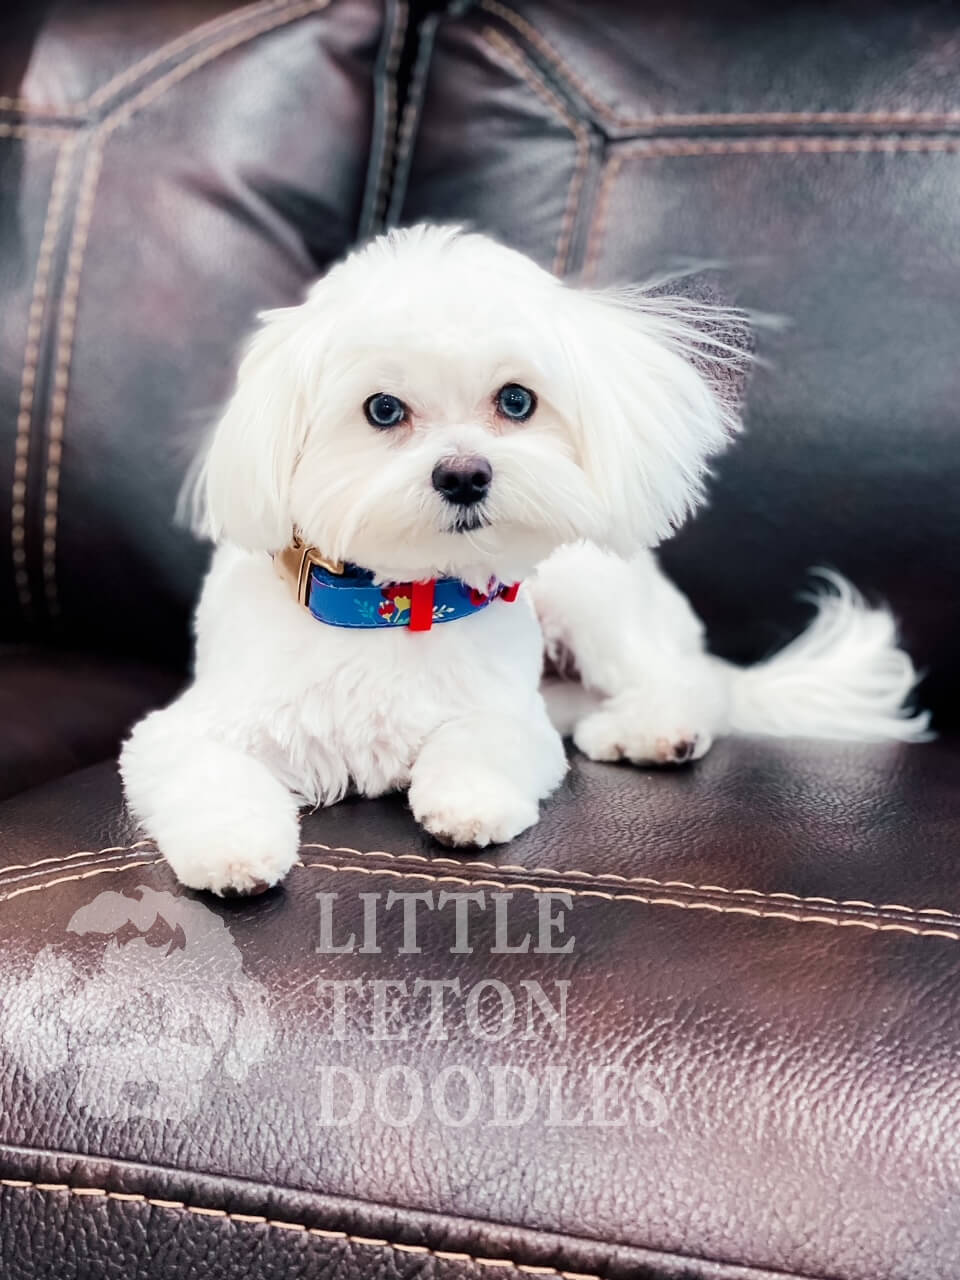 A small white dog calmly seated on a luxurious leather couch.